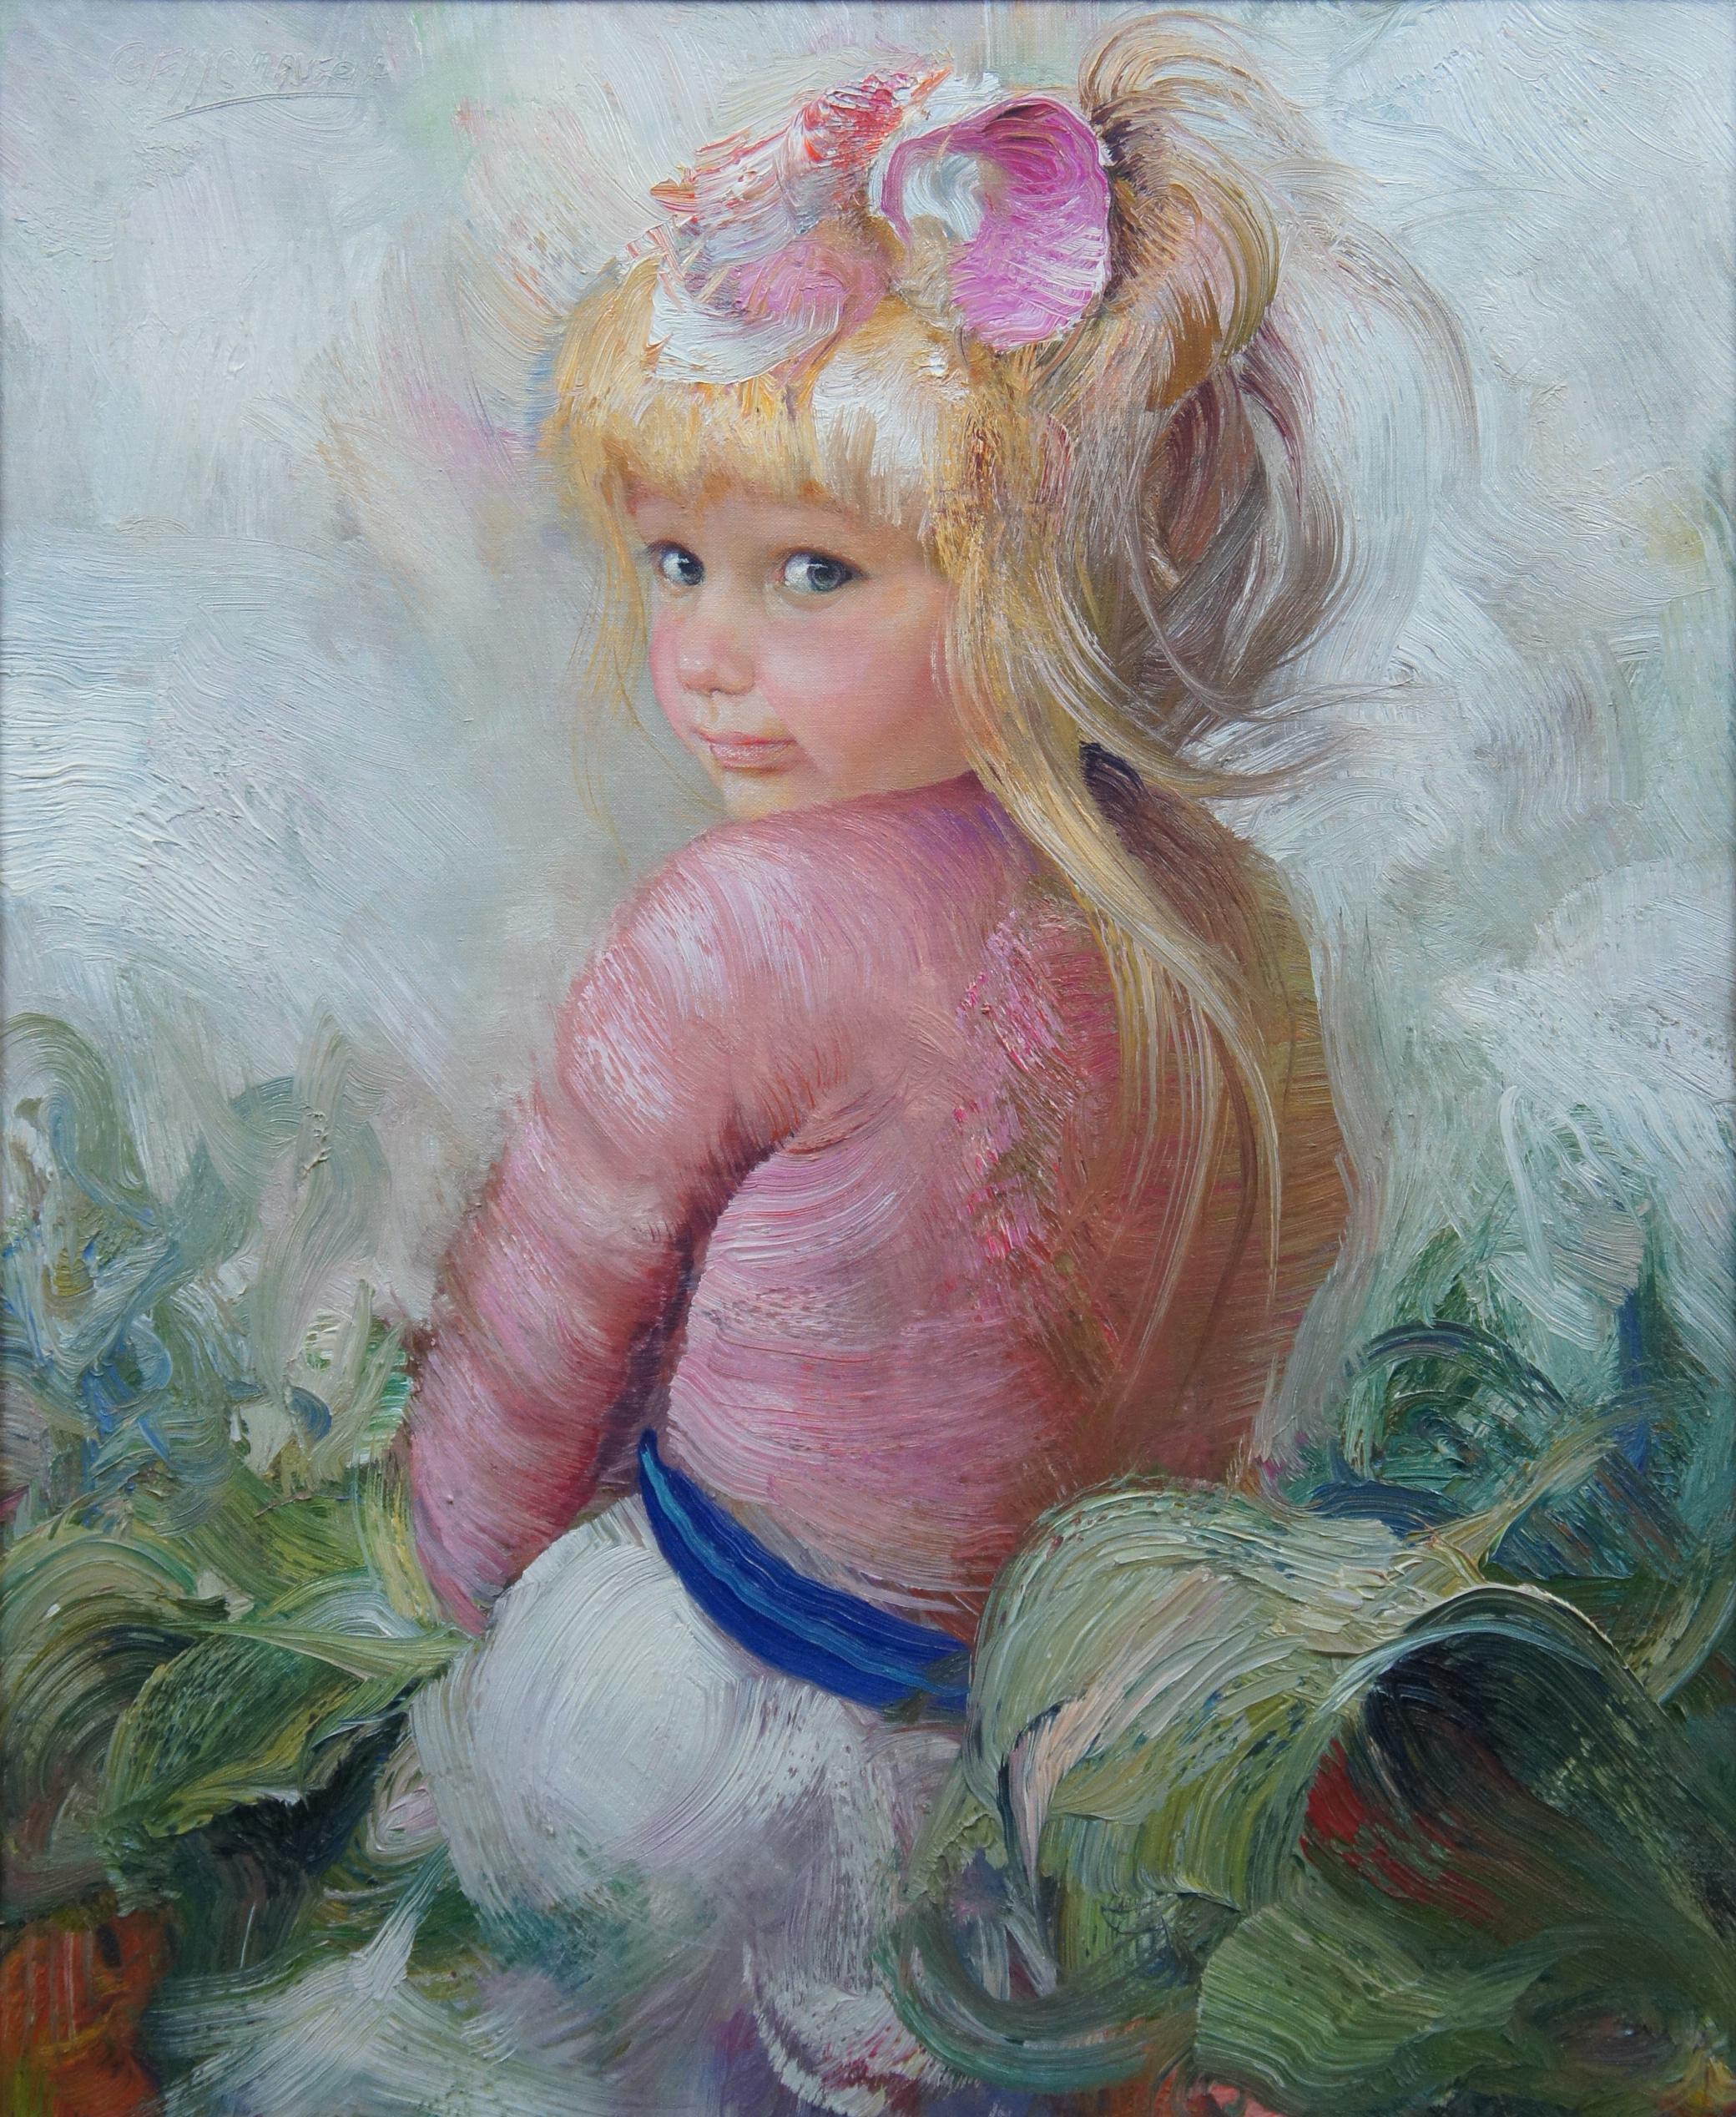 Expressionist Francisco Masseria Original Oil Painting on Canvas Portrait of a Blonde Girl